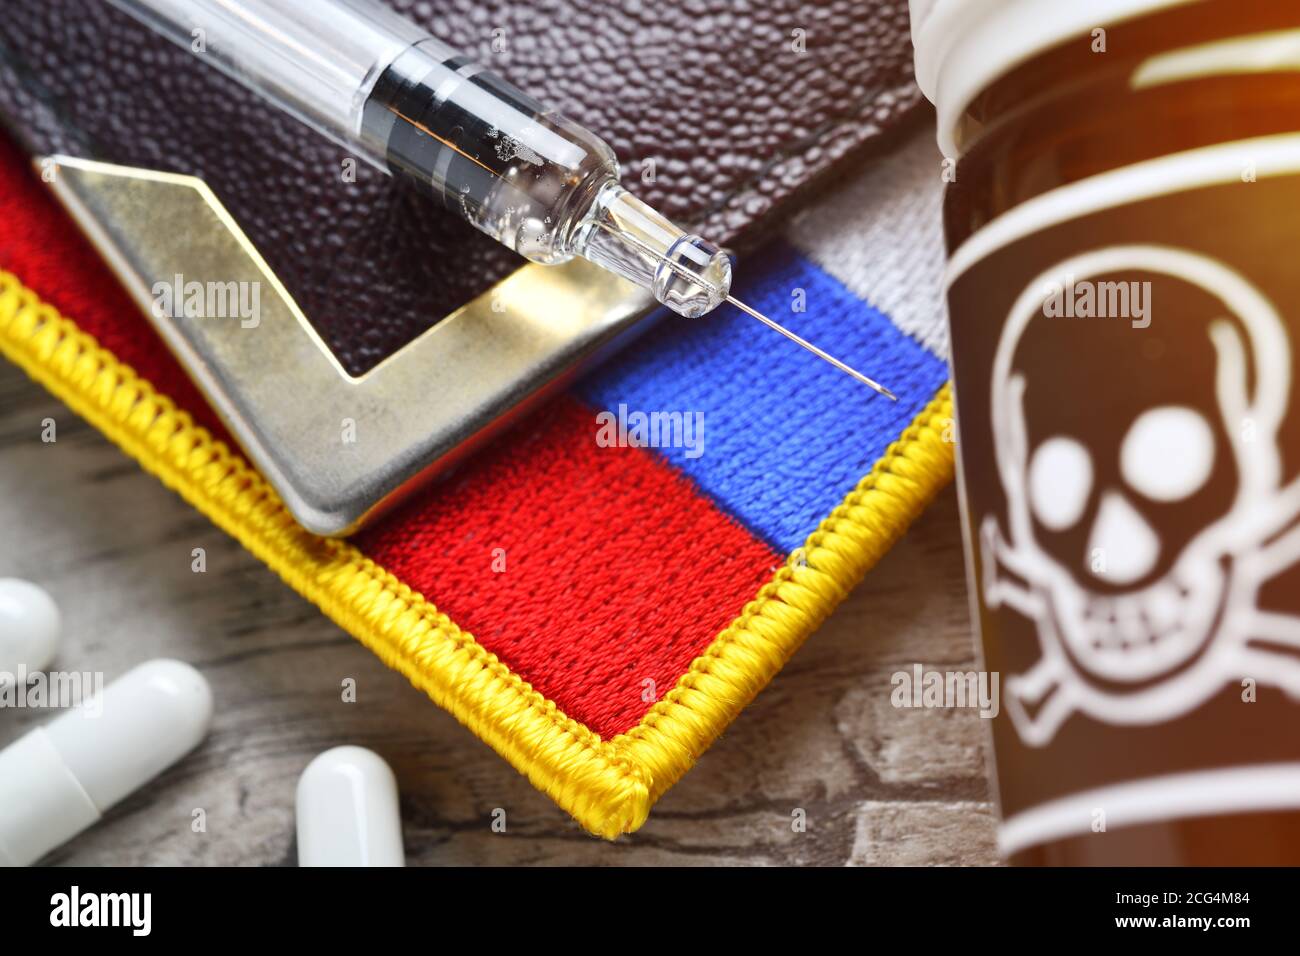 Syringe, poison vial and Russian flag, poison attack Stock Photo